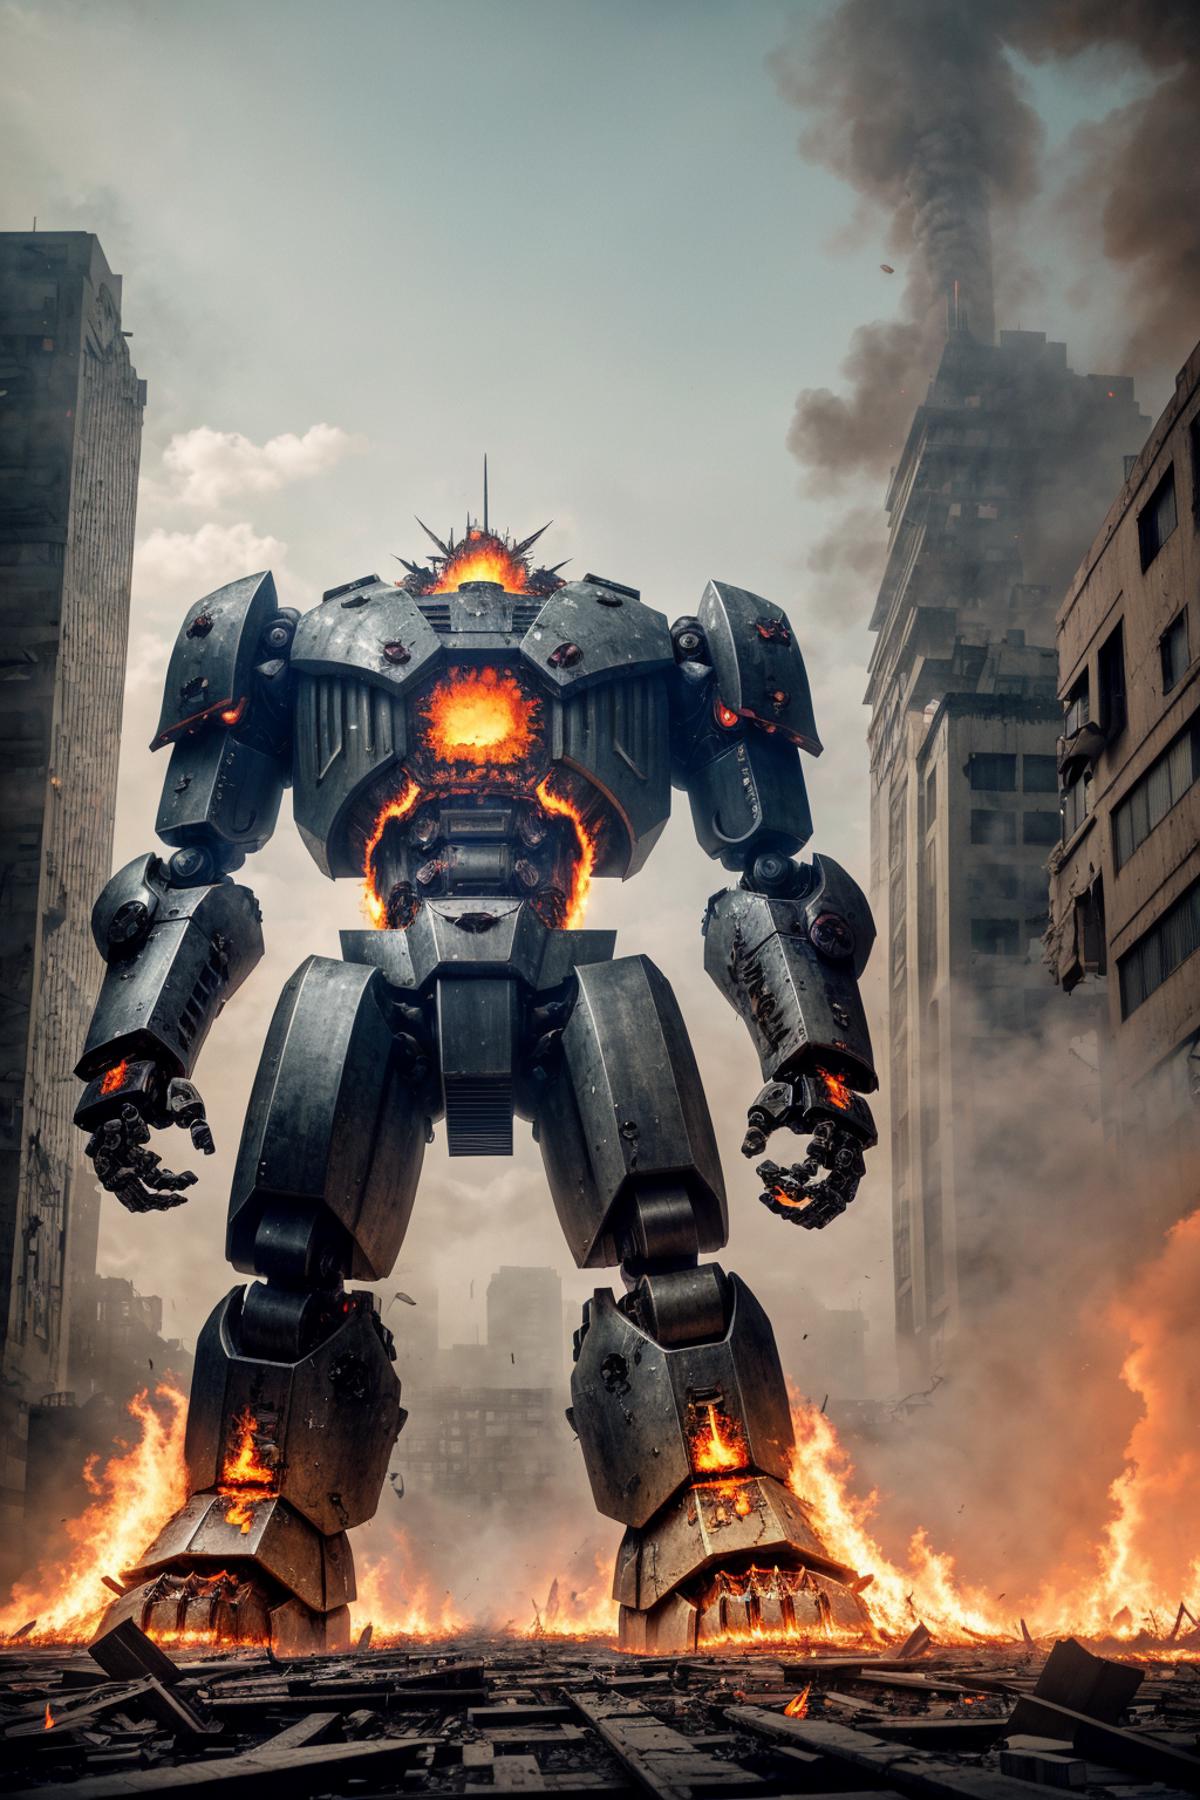 Giant Robot with Fire Explosions in a City, Standing Tall with Smoke and Flames